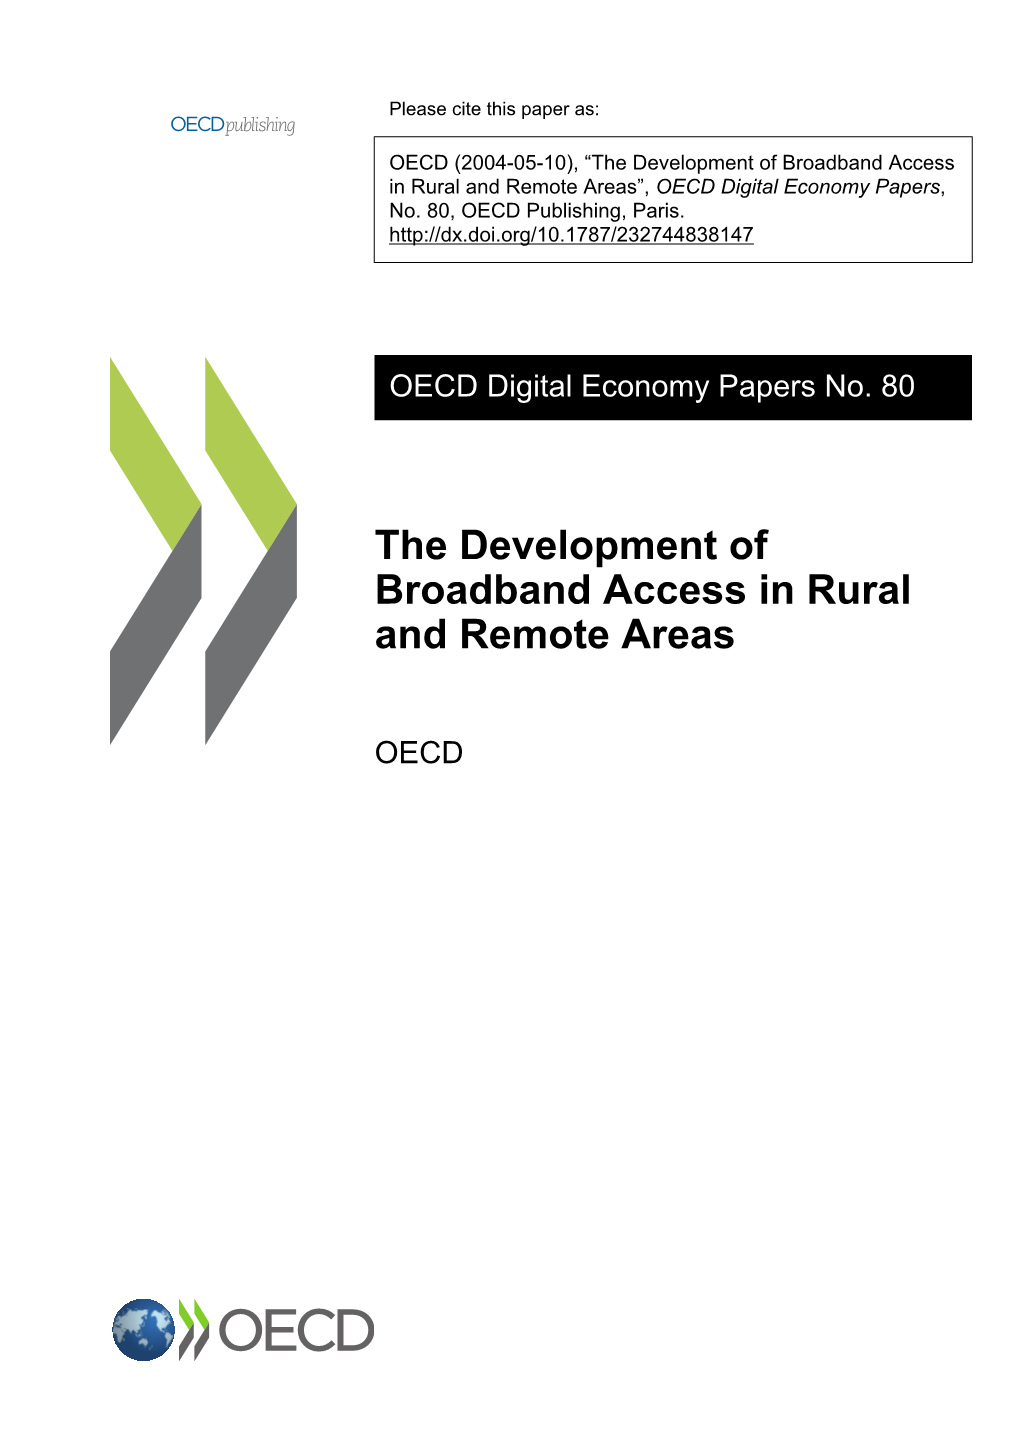 The Development of Broadband Access in Rural and Remote Areas”, OECD Digital Economy Papers, No